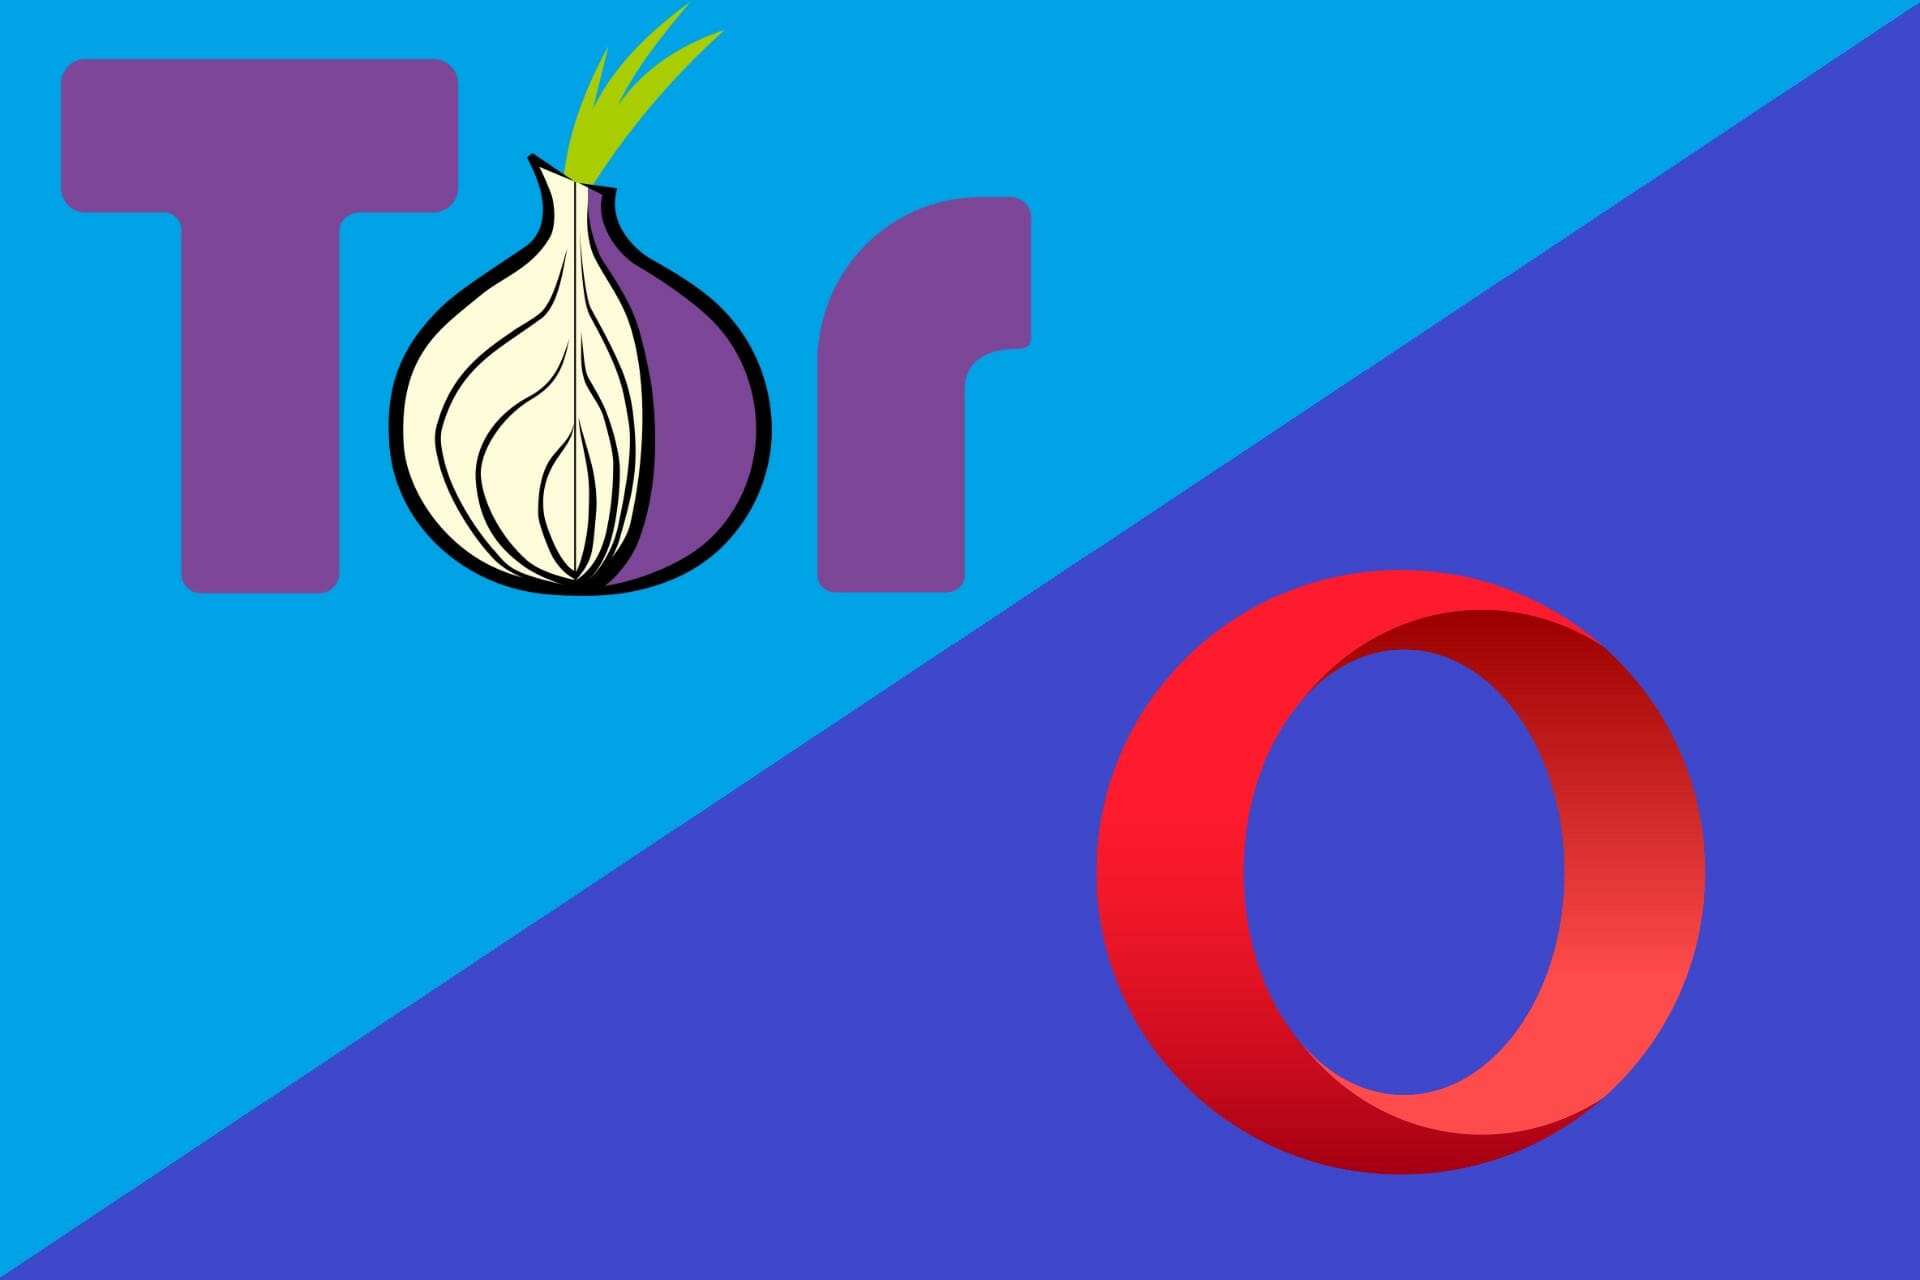 opera or tor browser which is better